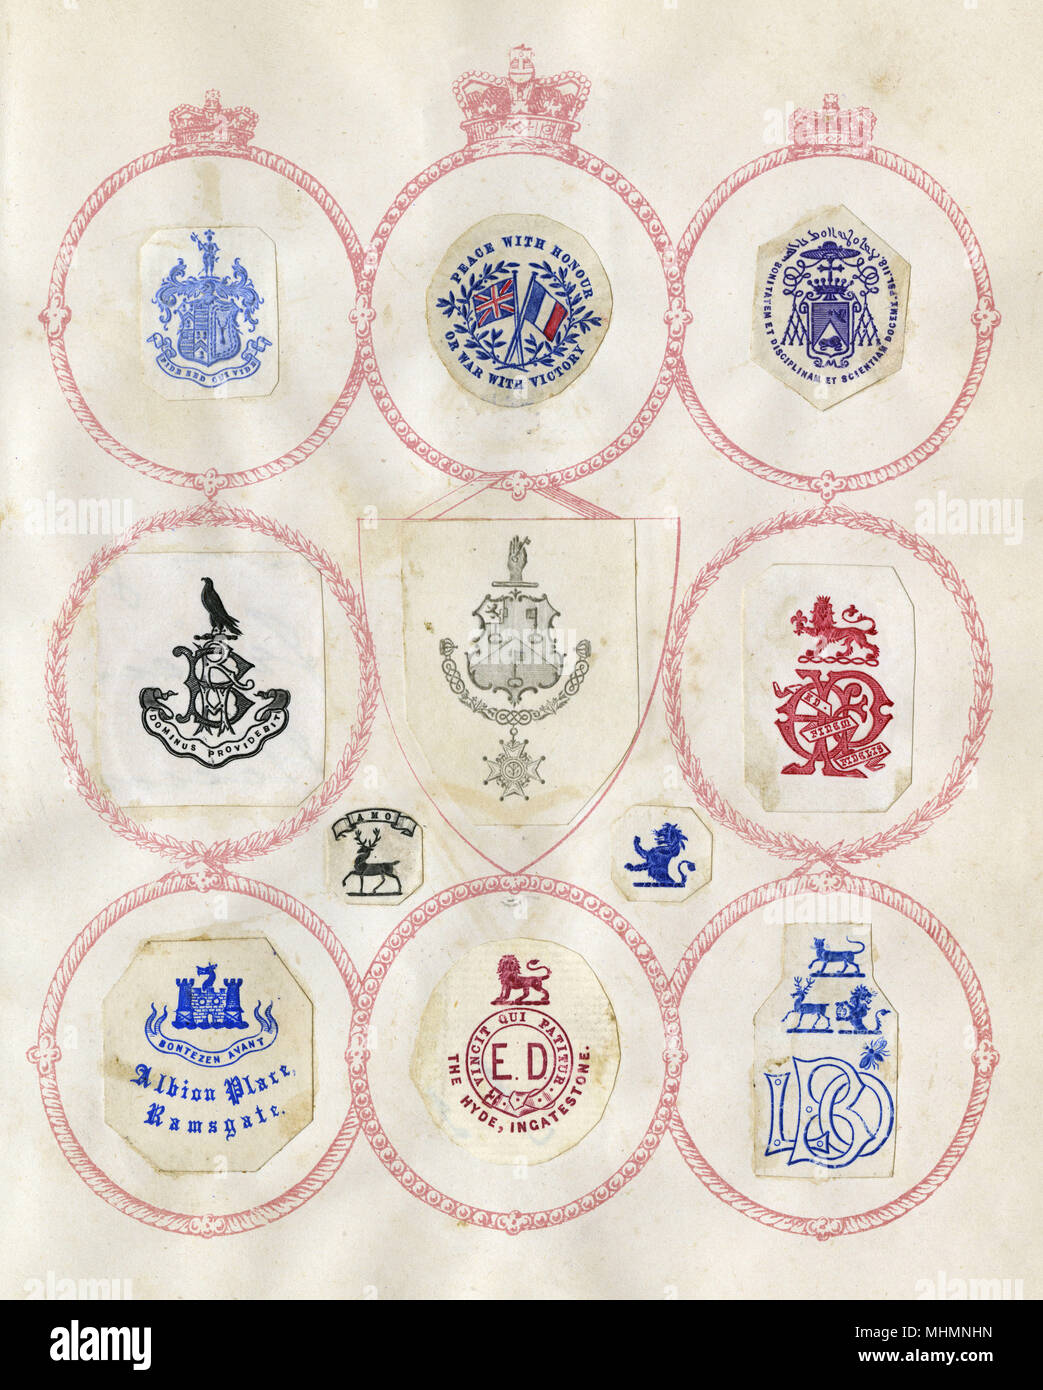 Loose page from a former scrapbook of crests and heraldry featuring family crests, coats of arms and many devices, shields, monograms and mottos!     Date: late 19th century Stock Photo